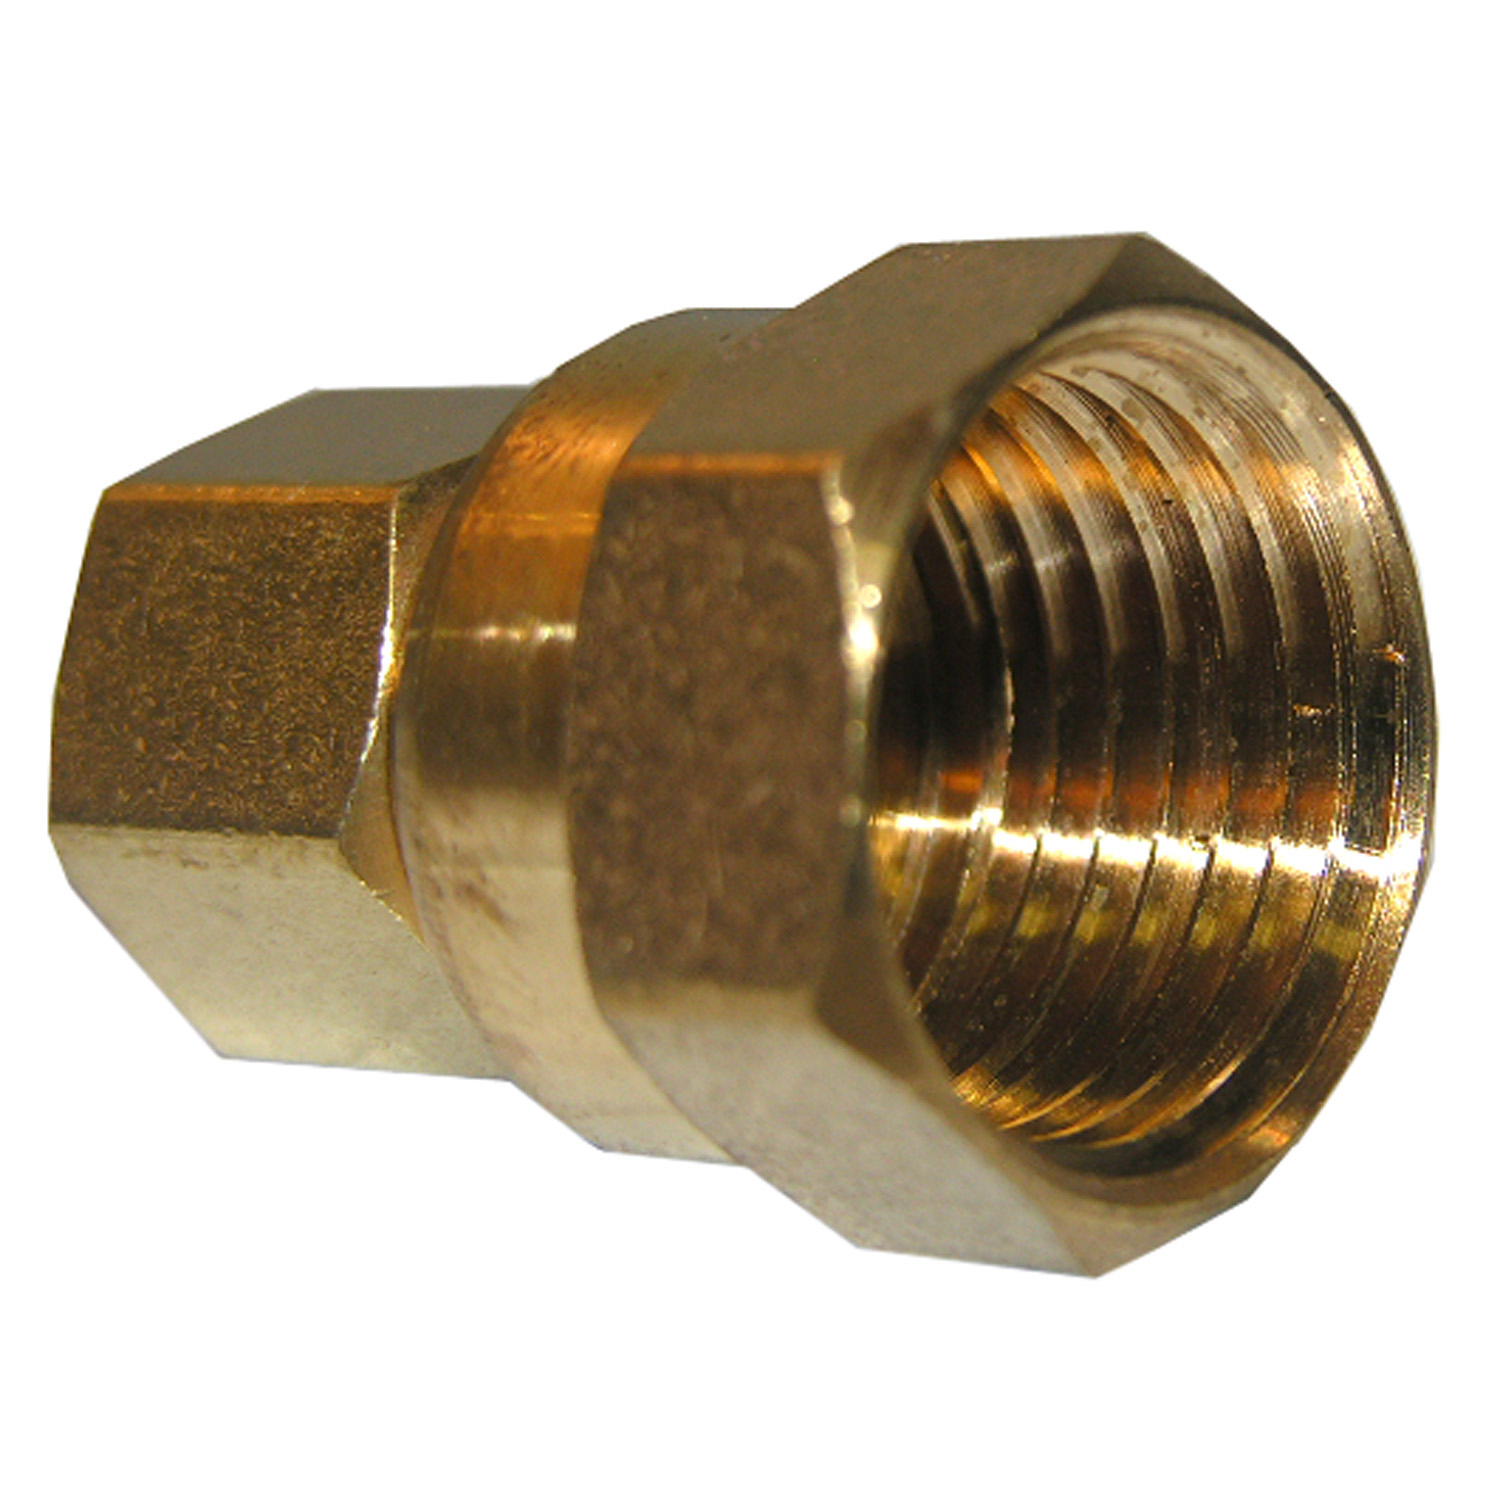 17-6637 Pipe Adapter, 3/8 x 1/2 in, Compression x FPT, Brass, 150 psi Pressure